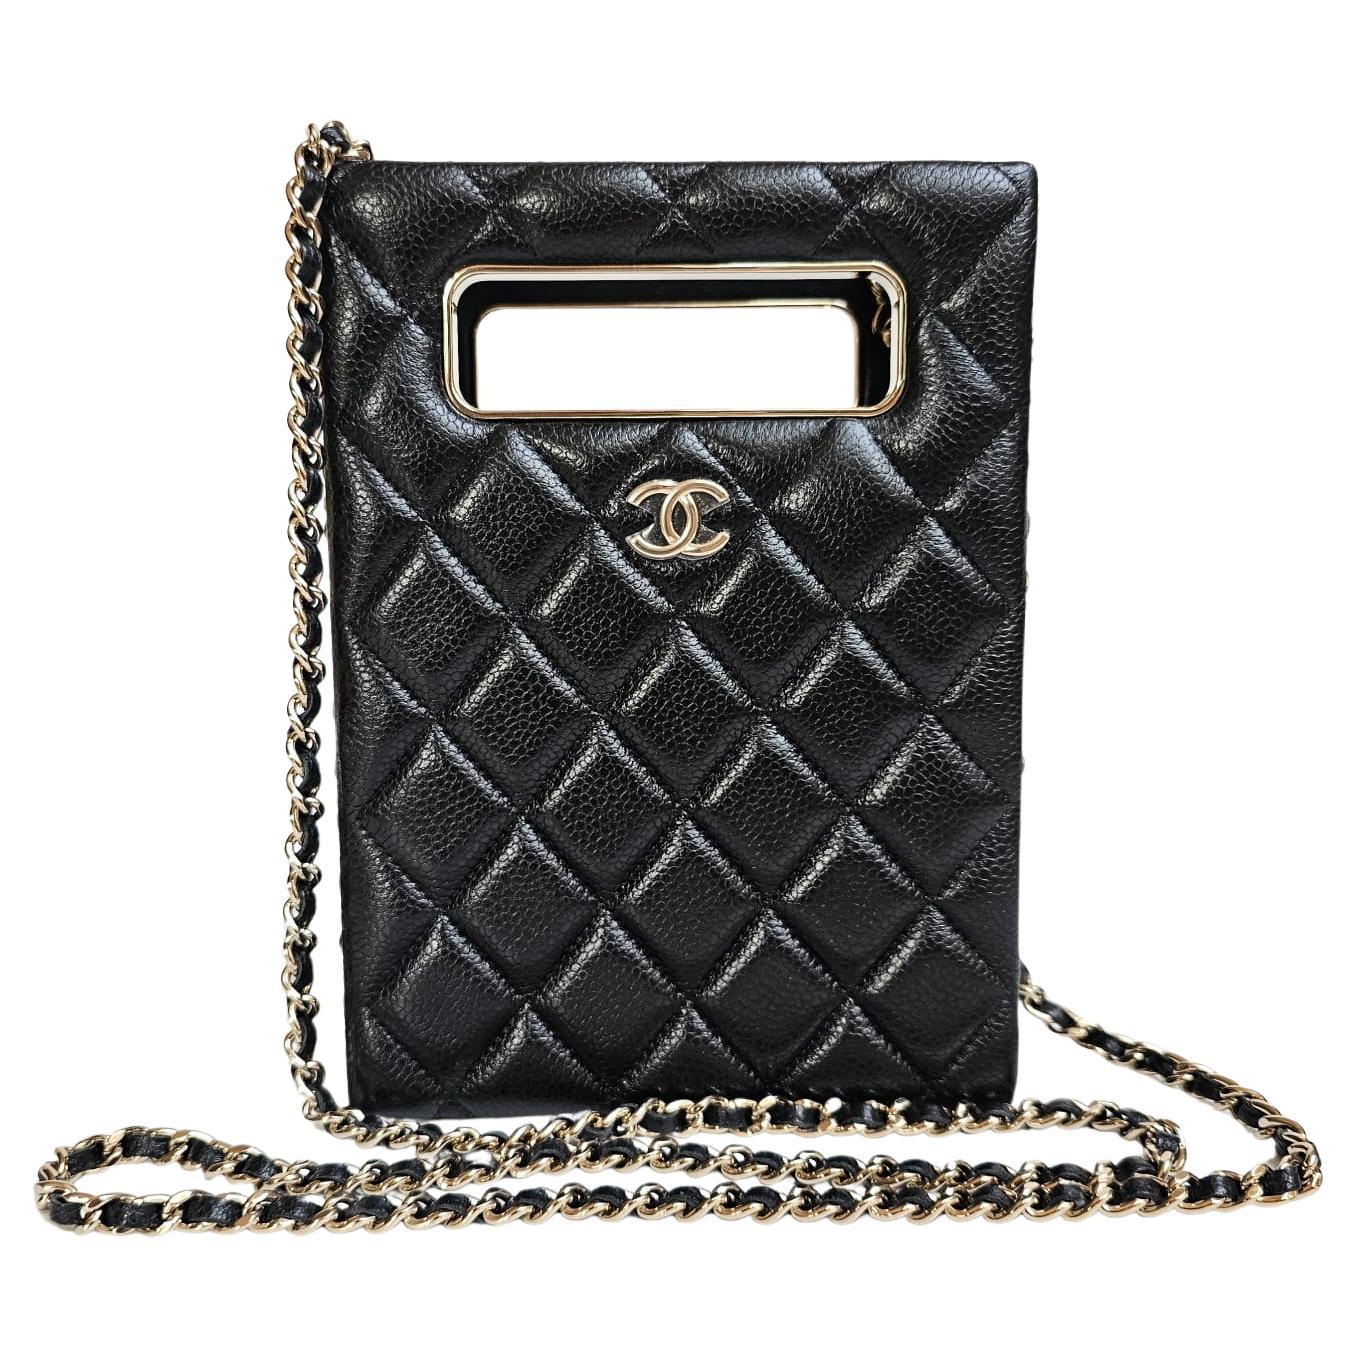 Chanel Black Caviar Quilted Evening Box Bag